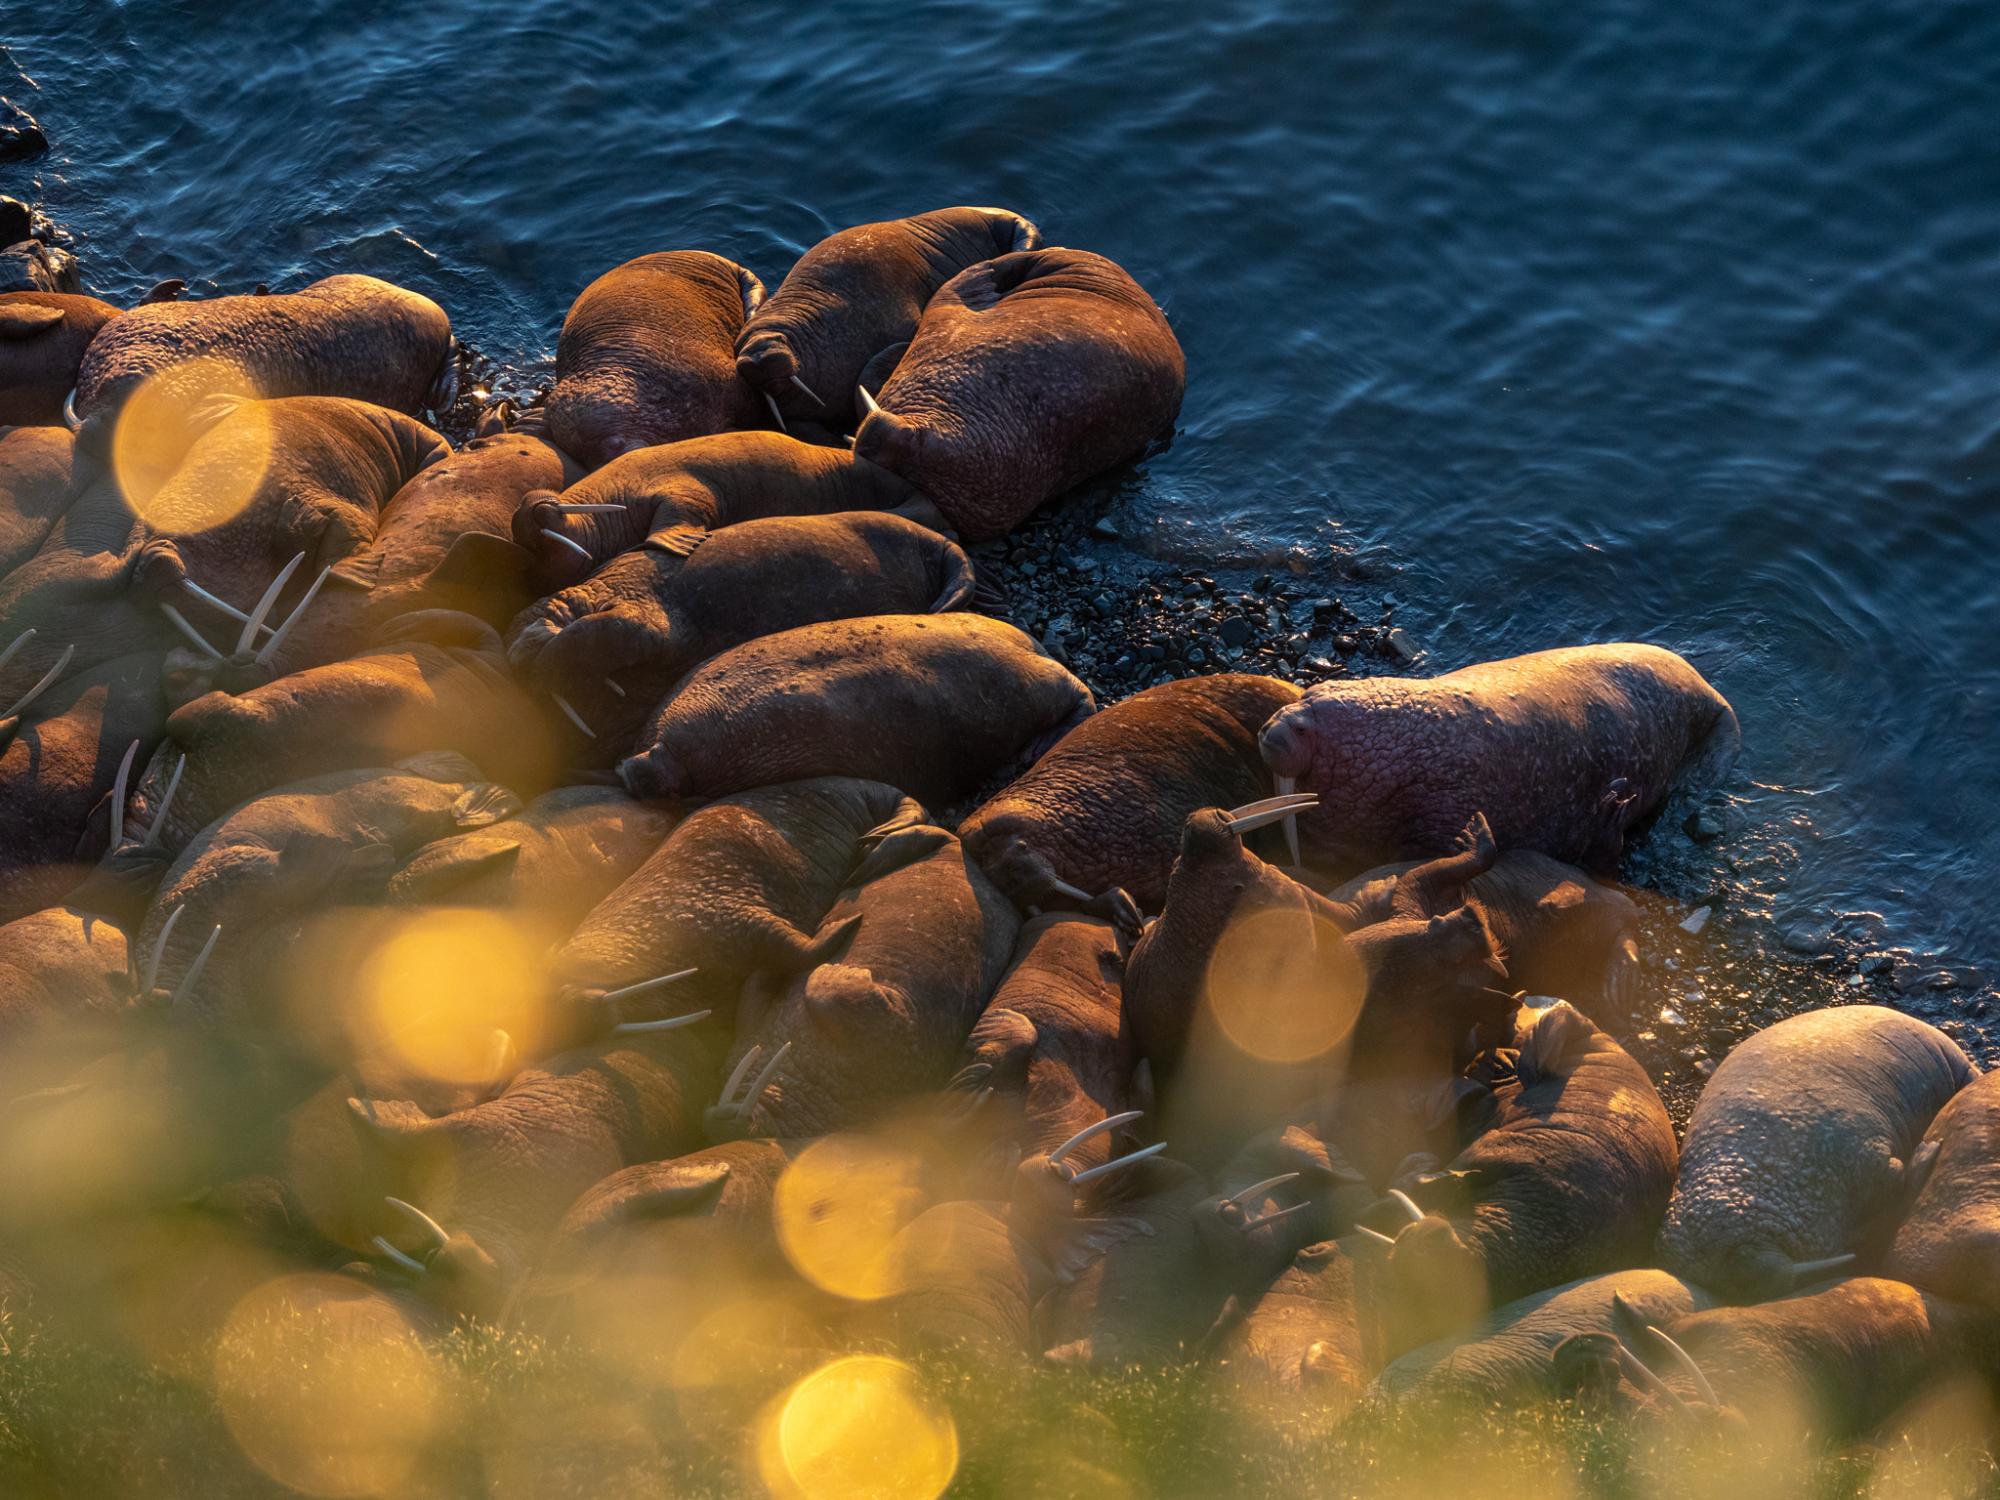 Walrus Islands - The sun rises over a group of Pacific walrus on Round...